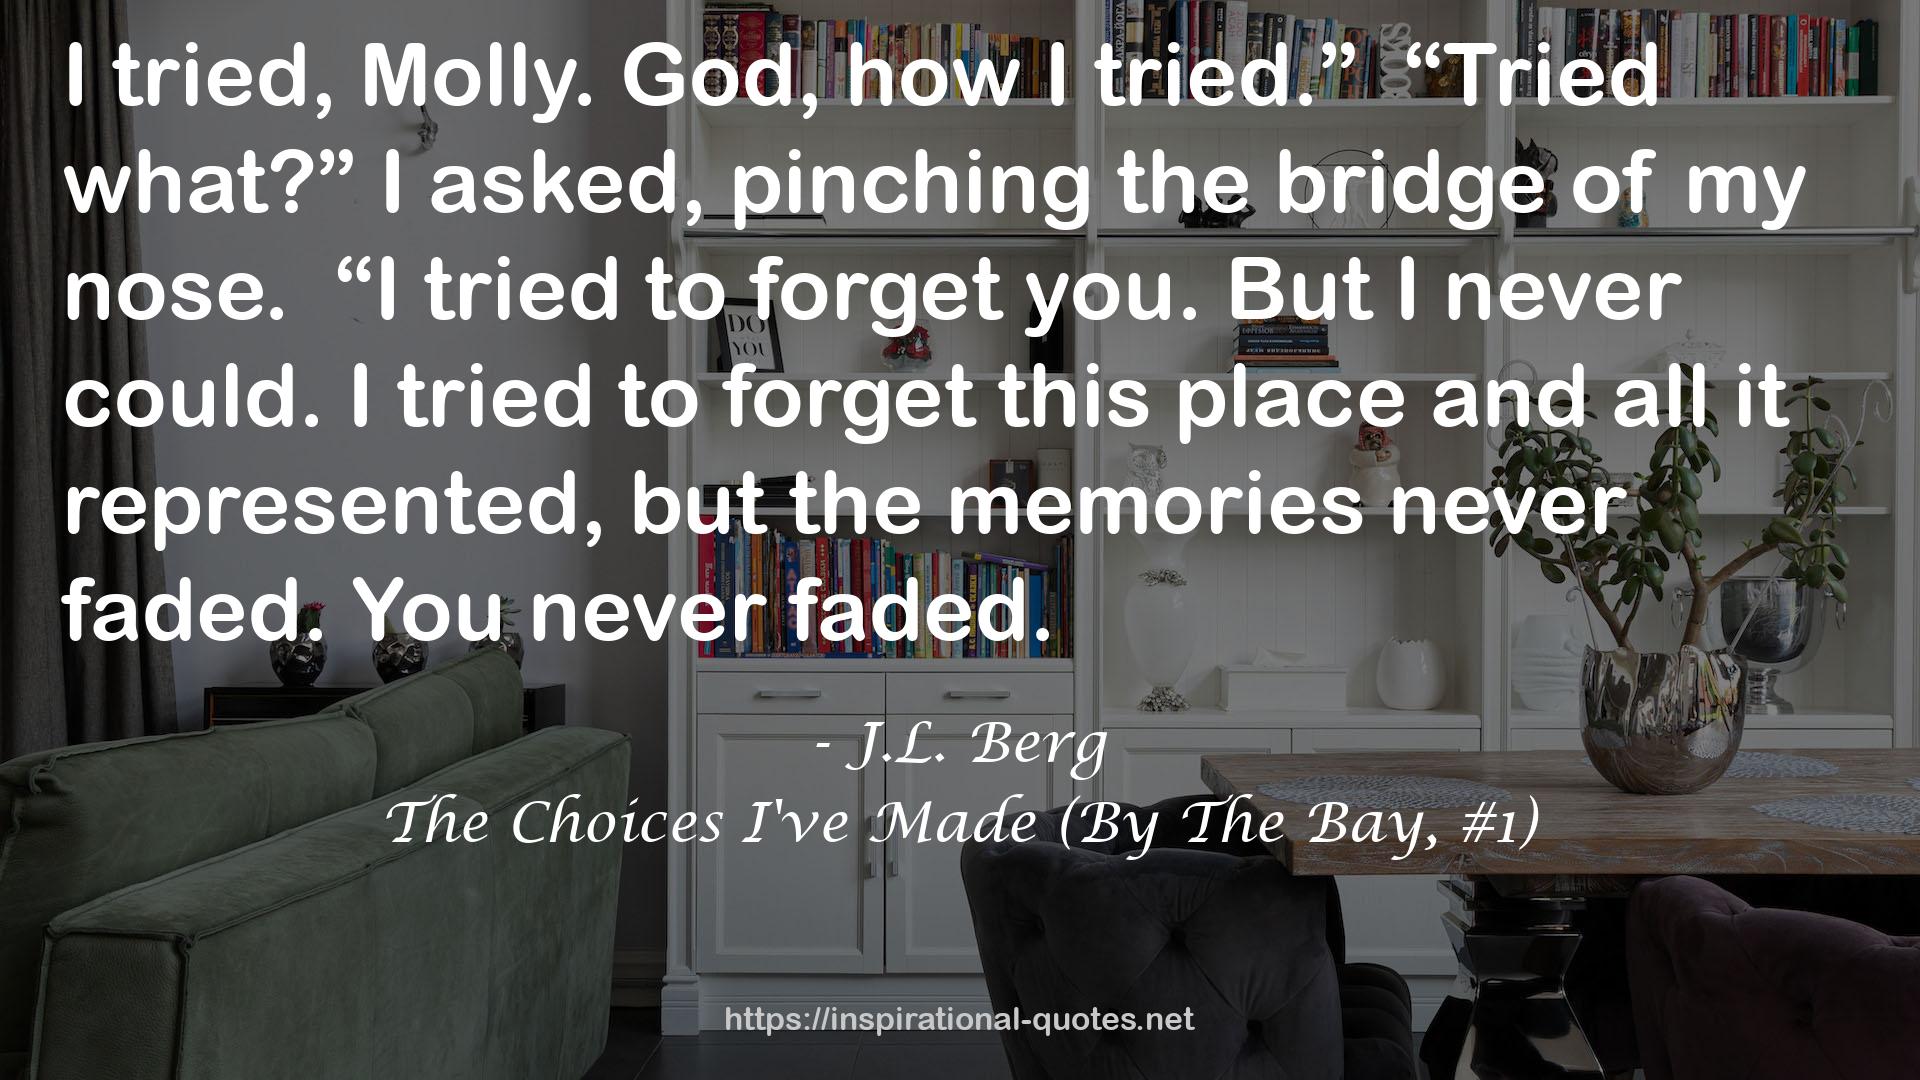 The Choices I've Made (By The Bay, #1) QUOTES